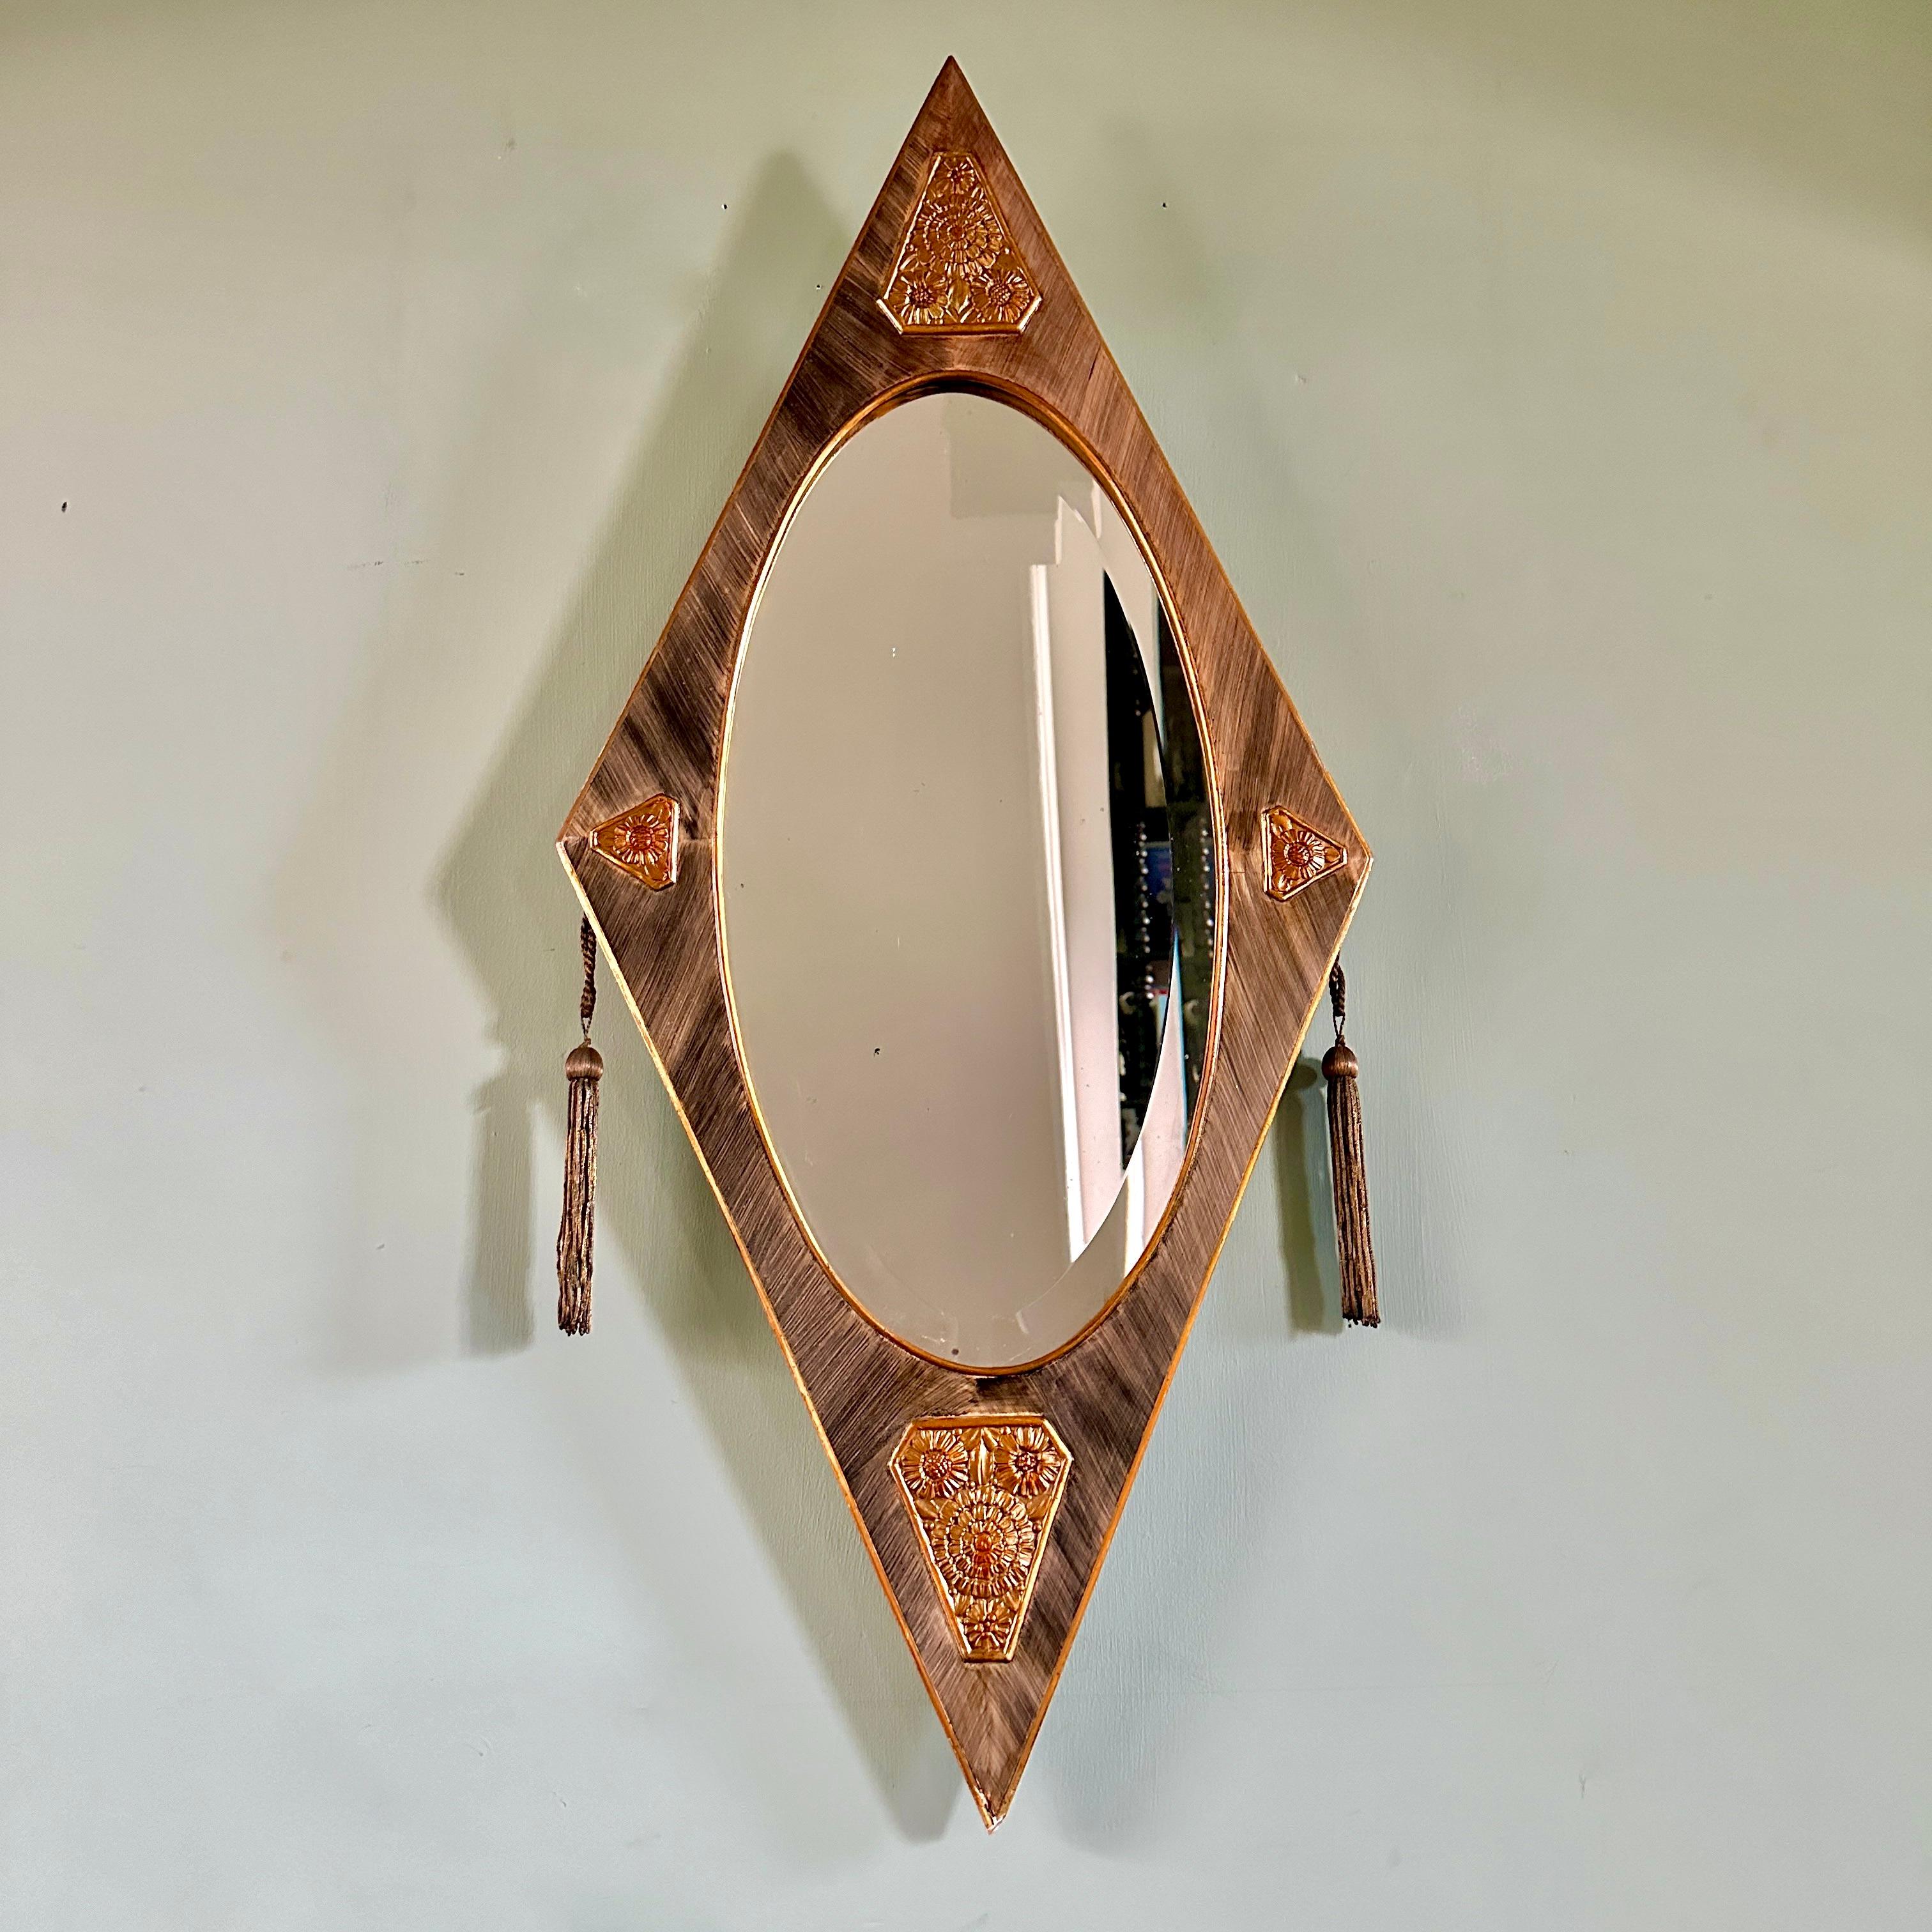 1920s French Art Deco mirror.

Superb diamond-shaped, hand-painted wood and bevelled glass mirror with gilt decorative reliefs and embroidered brass tassels. In very good condition with light and attractive wear.

Height 103cm Width 48cm 